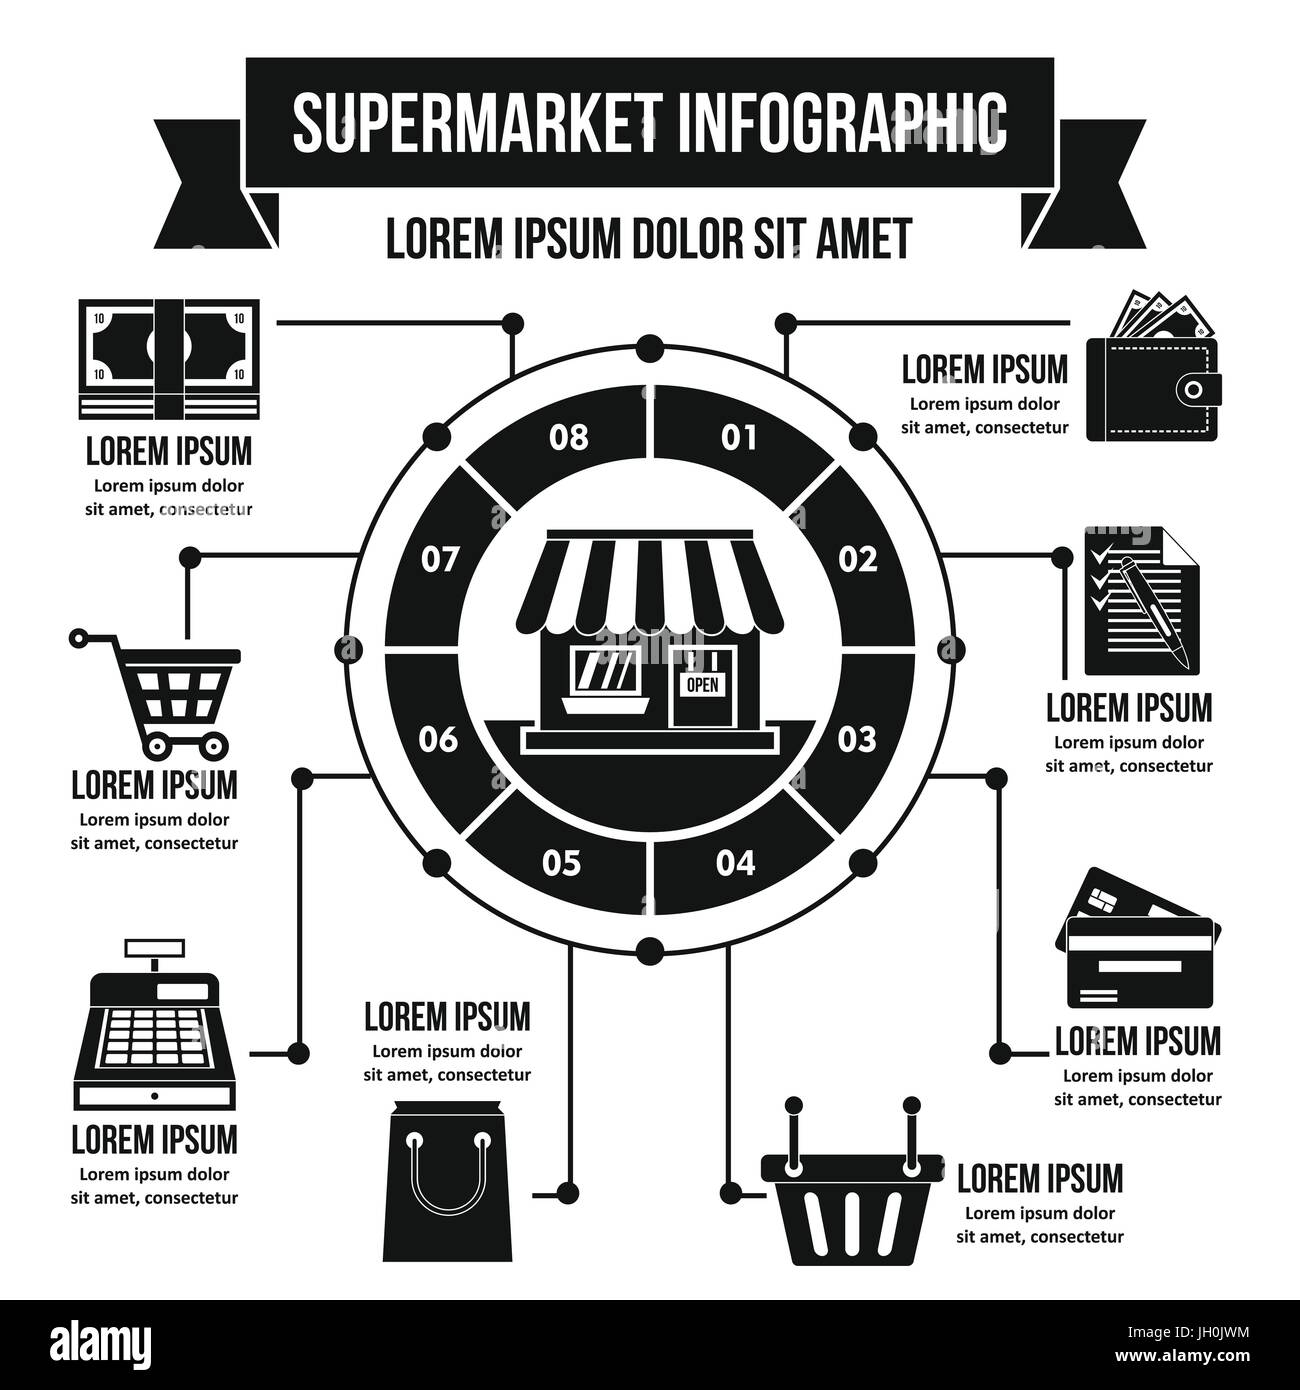 Supermarket infographic concept, simple style Stock Vector